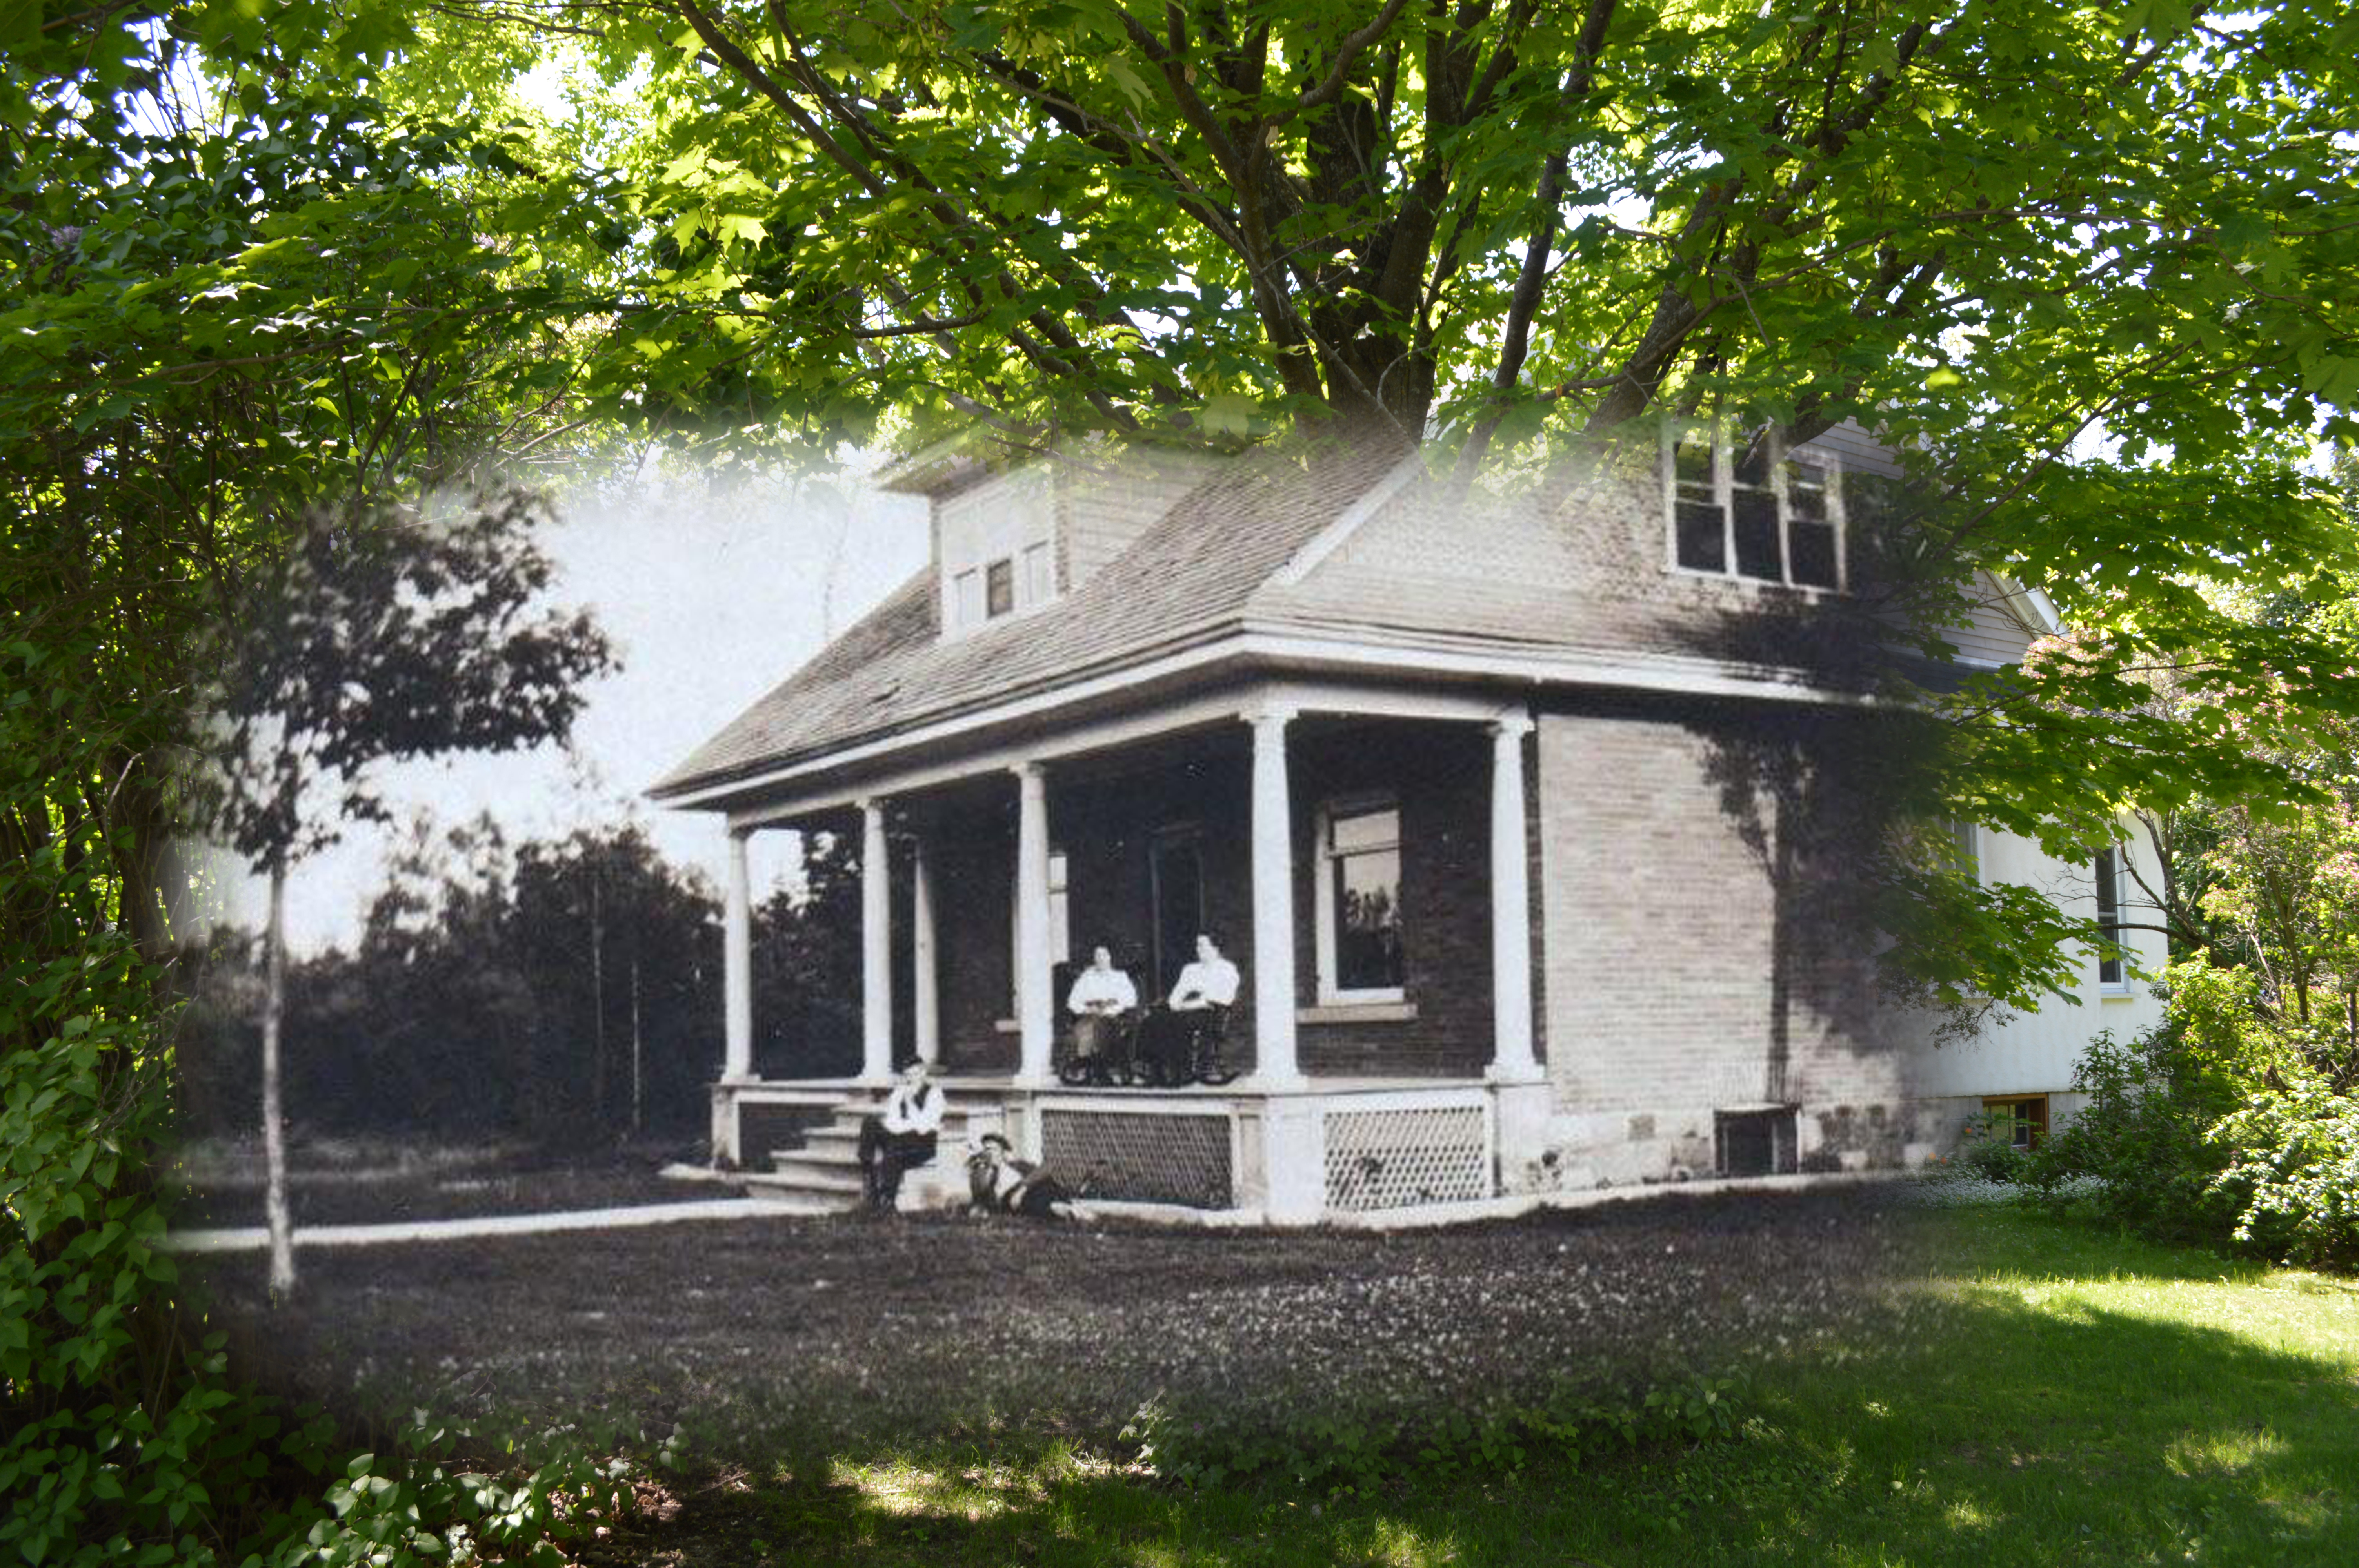 A B&W photograph of a family sitting on a porch superimposed over contemporary image of trees.